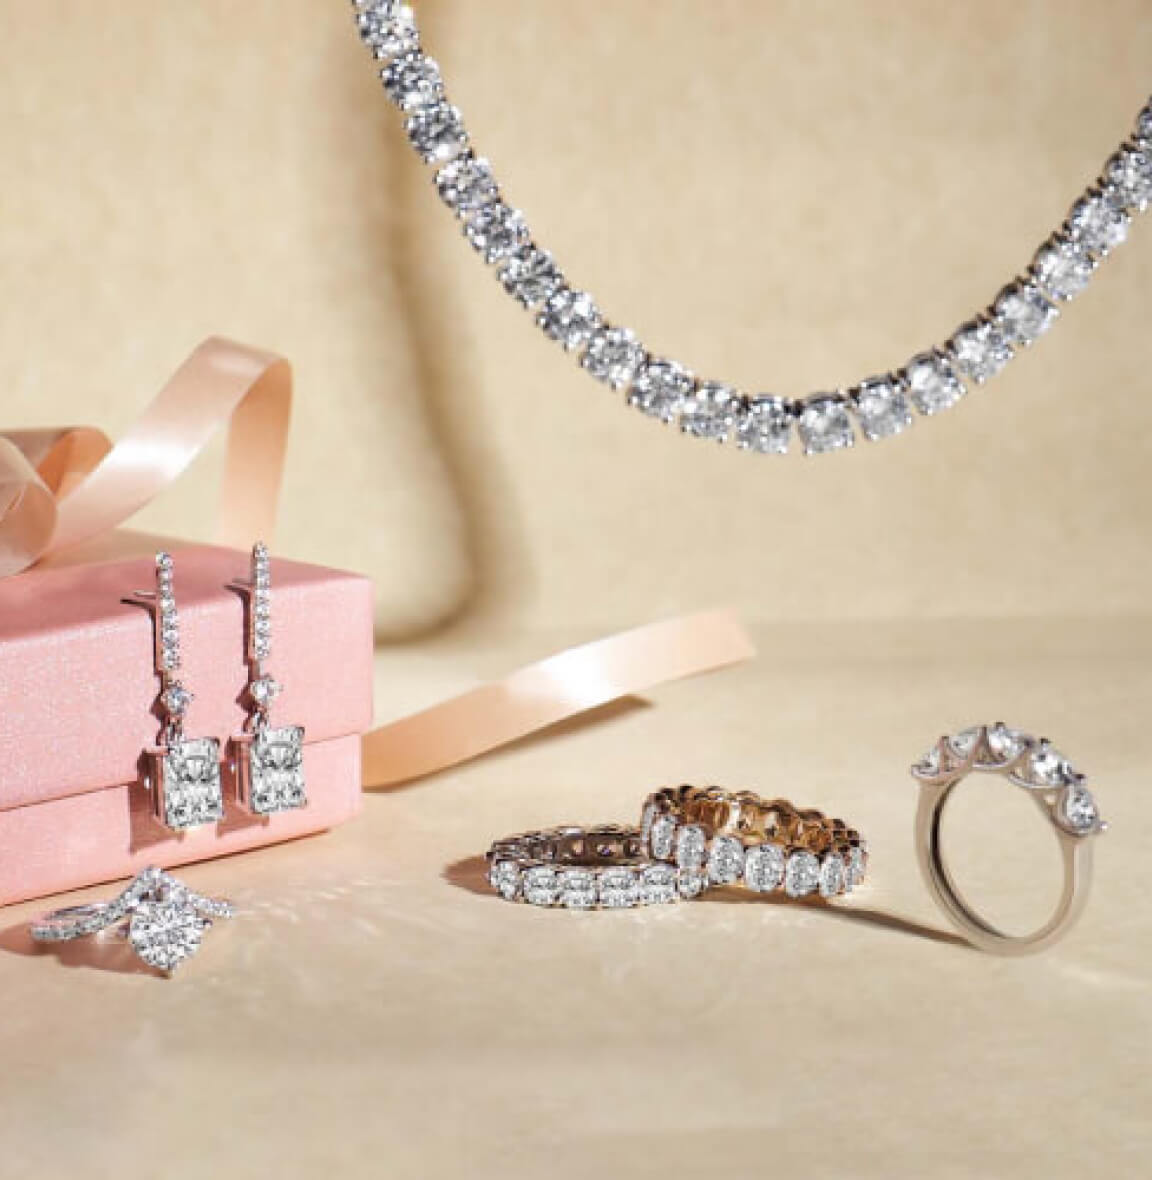 She Rules: Lab Diamond Jewellery For The Fashion-Forward Brides